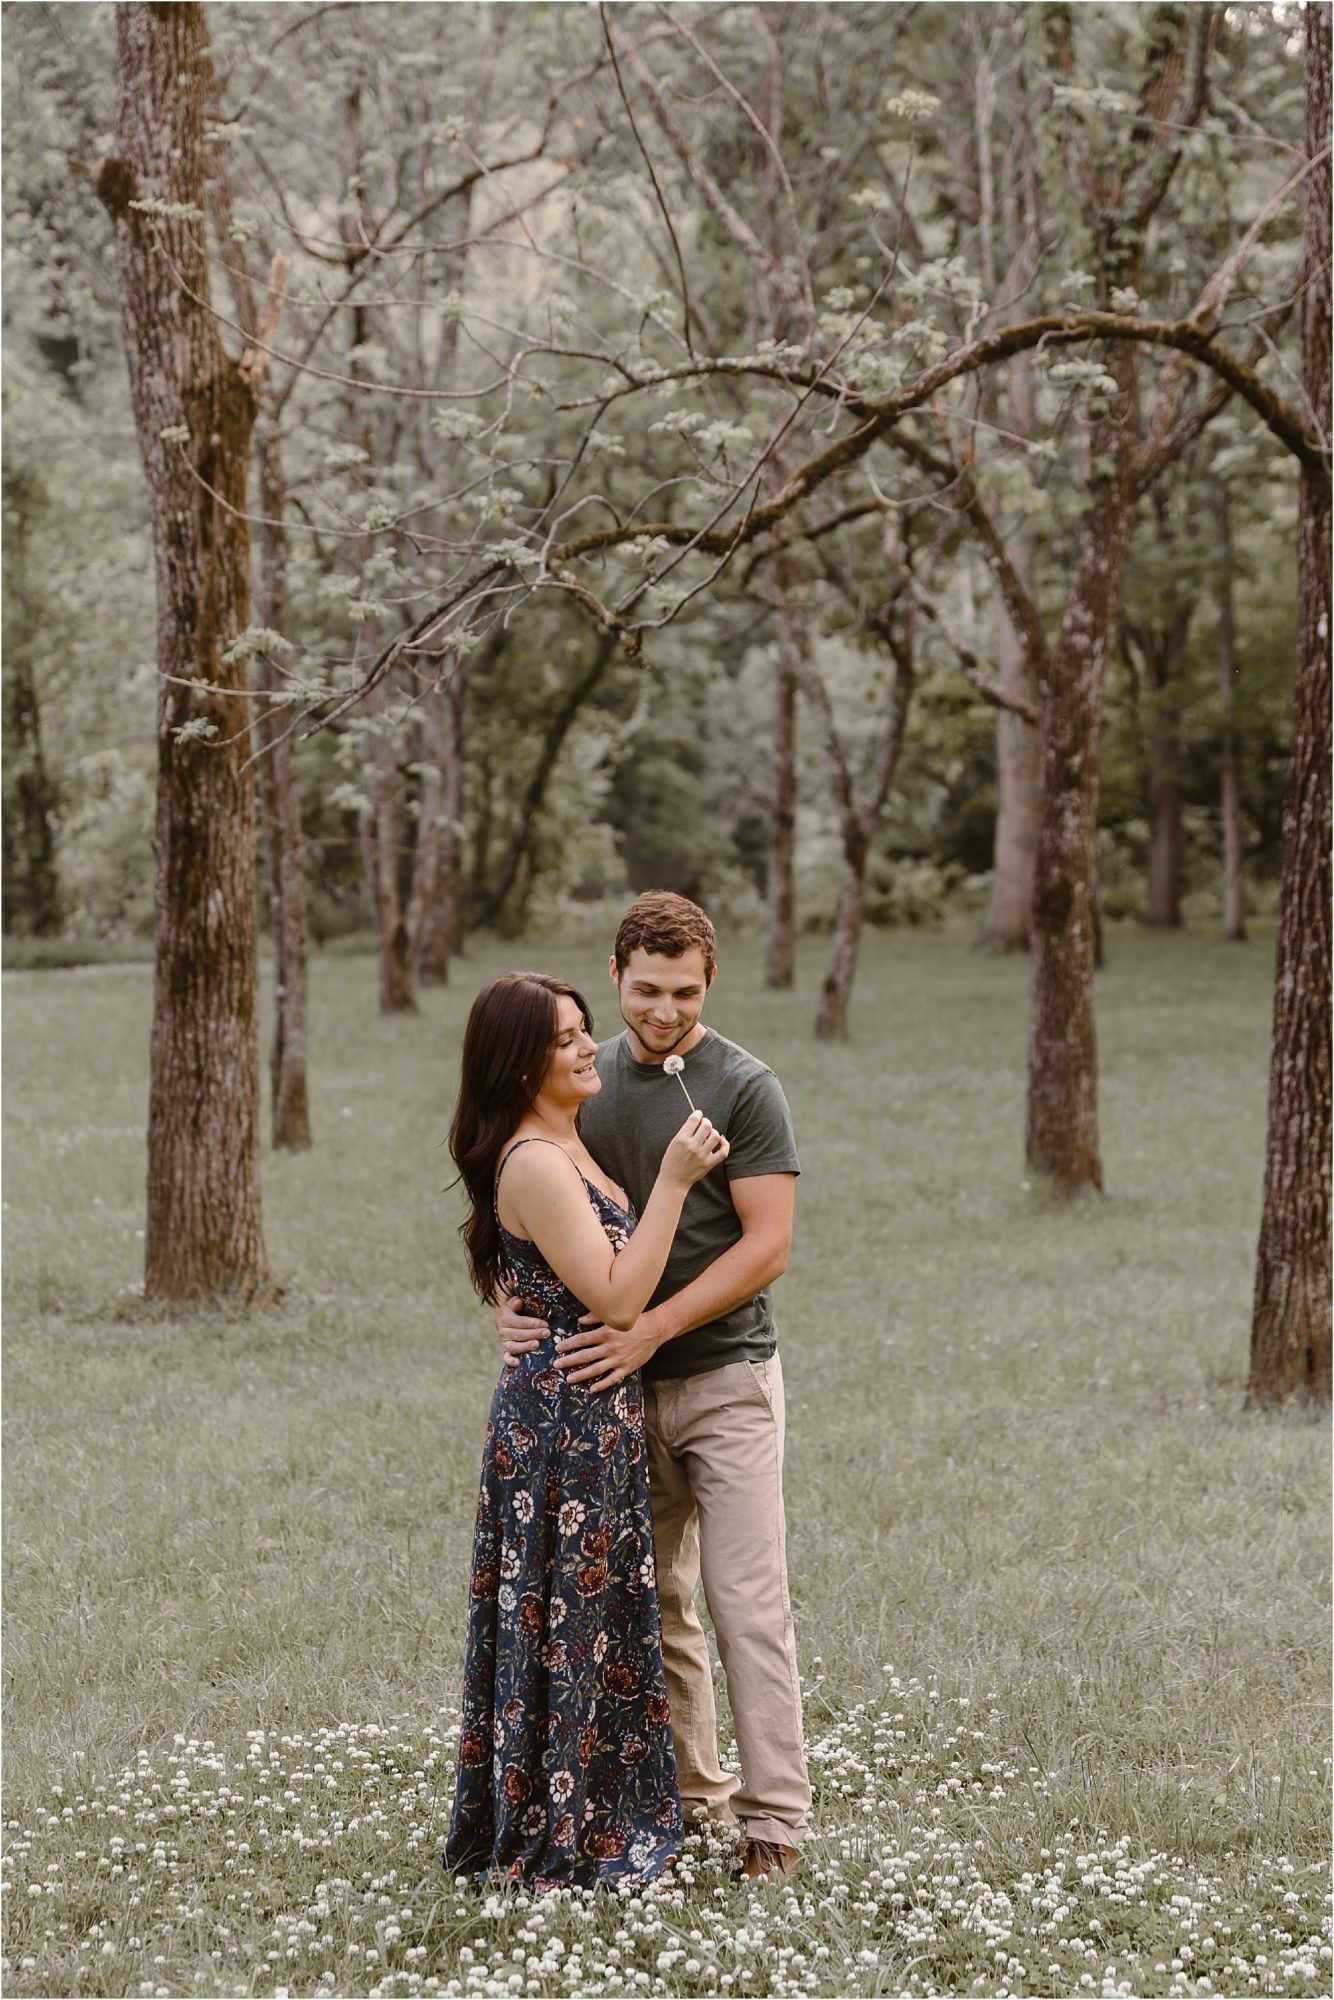 girl blowing Dandelion seeds at engagement photos